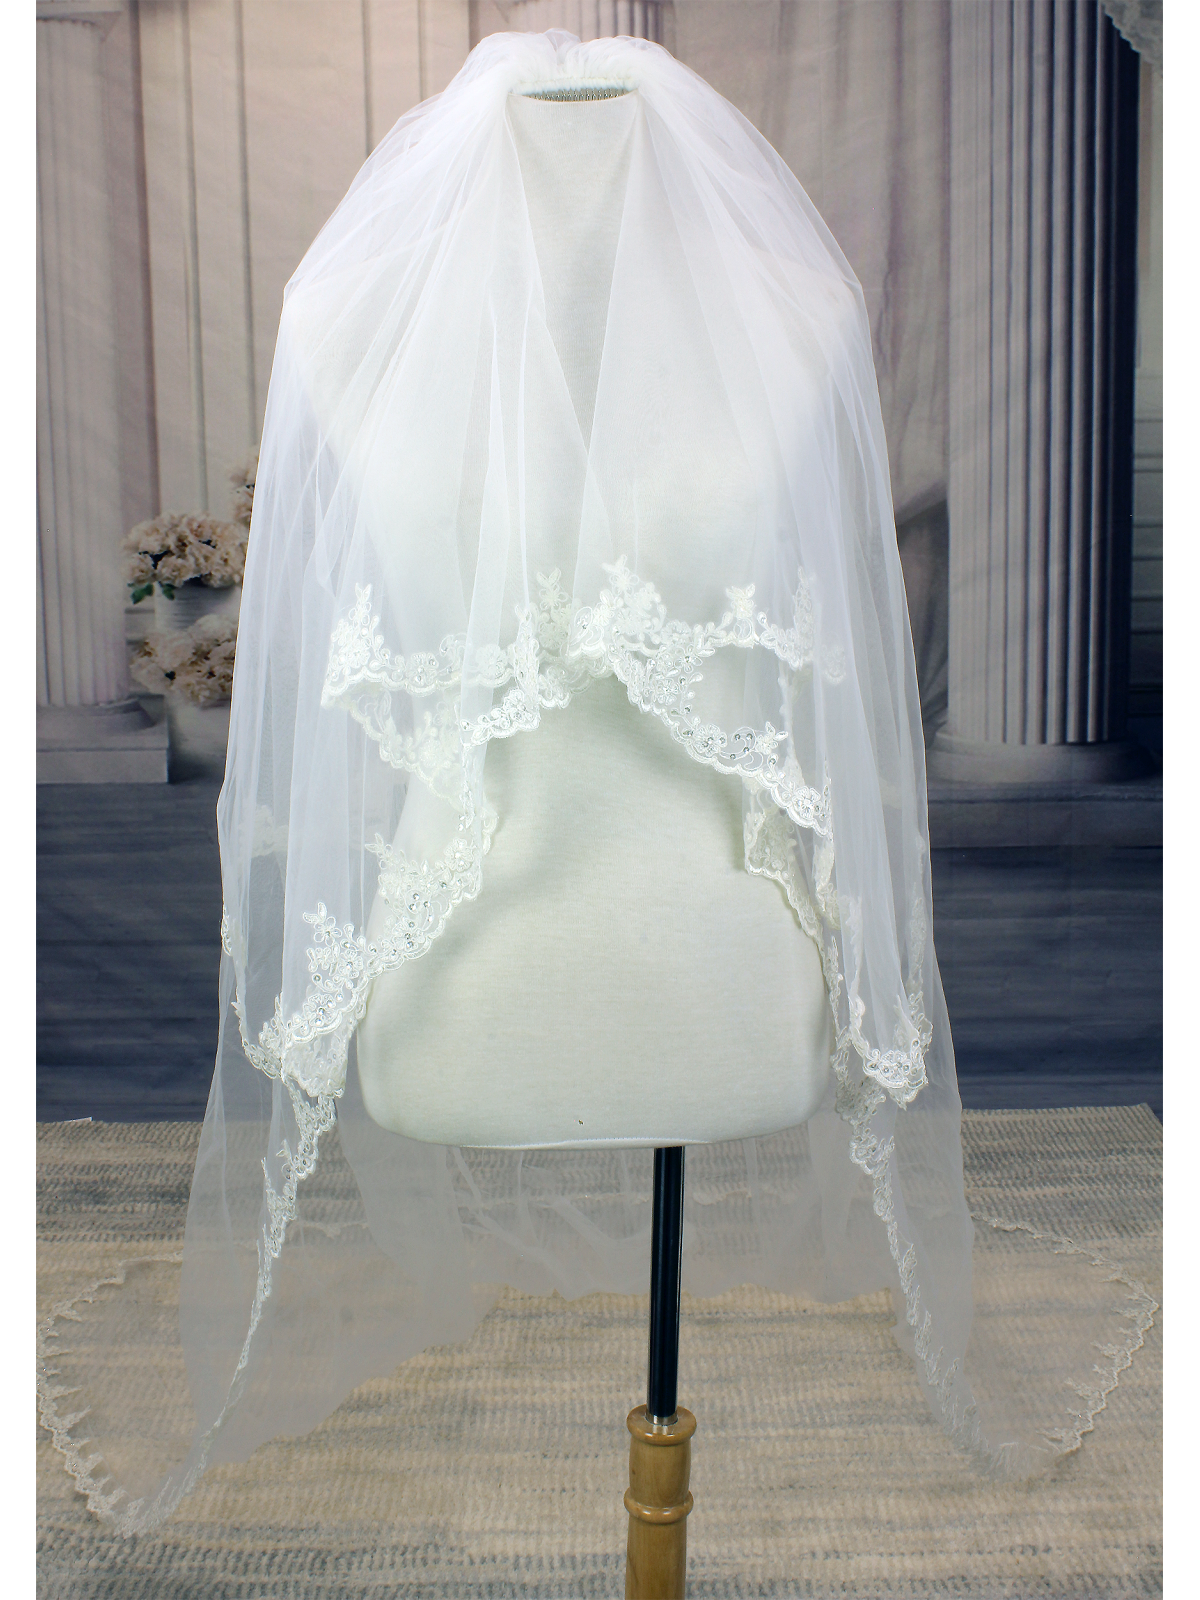 Long Veil - 2 layers Trim with sequined lace - 110" - VL-V1092-110IV